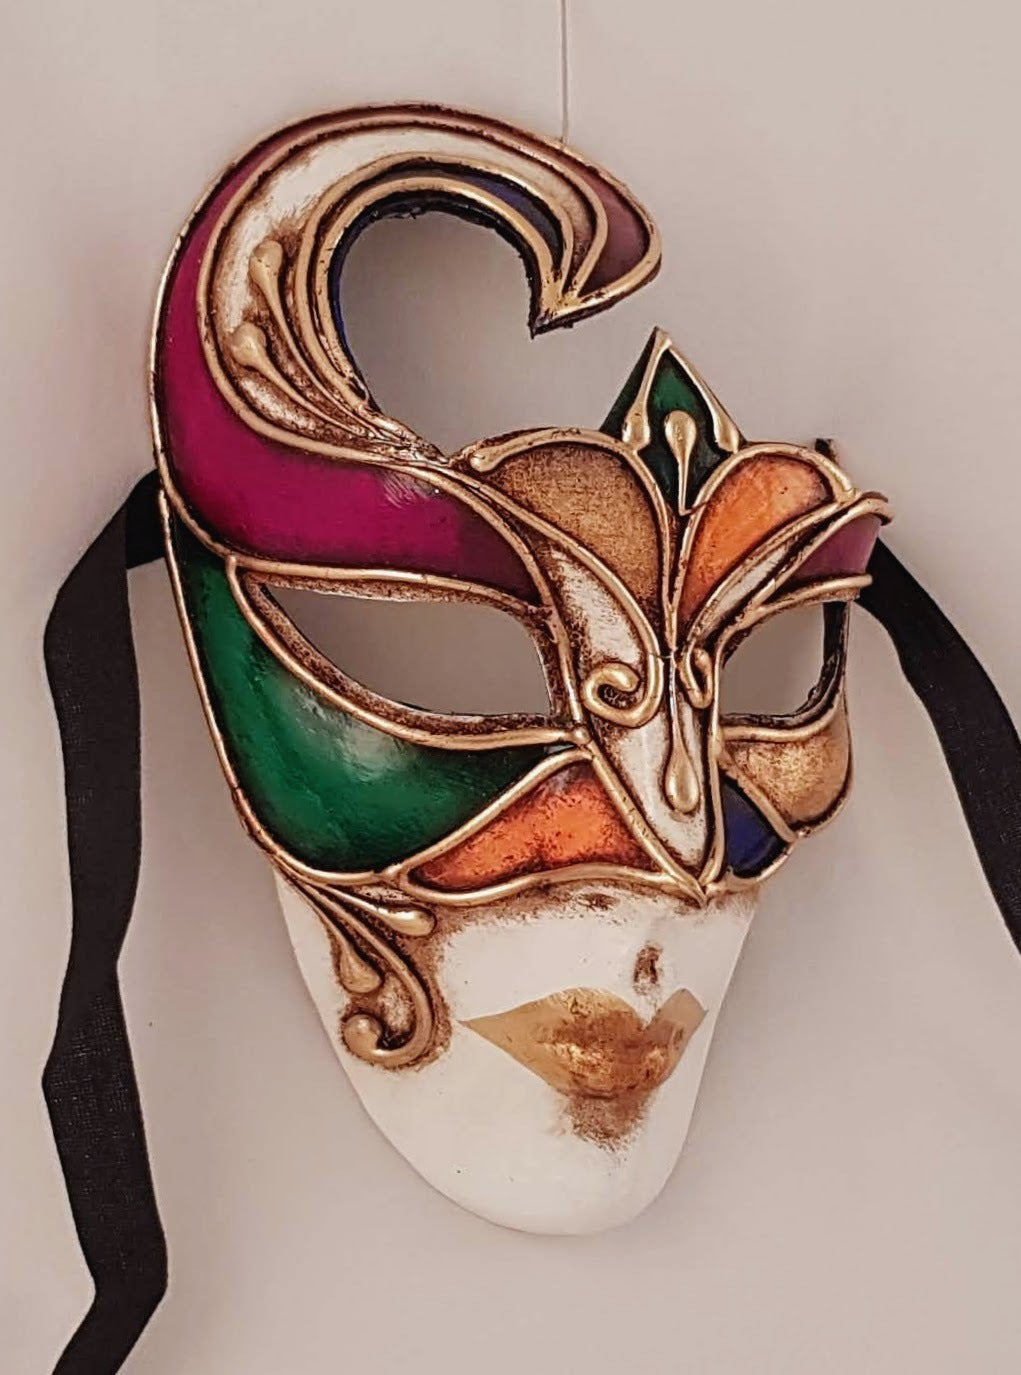 Venetian Mask On Sale: Volto Roby 1